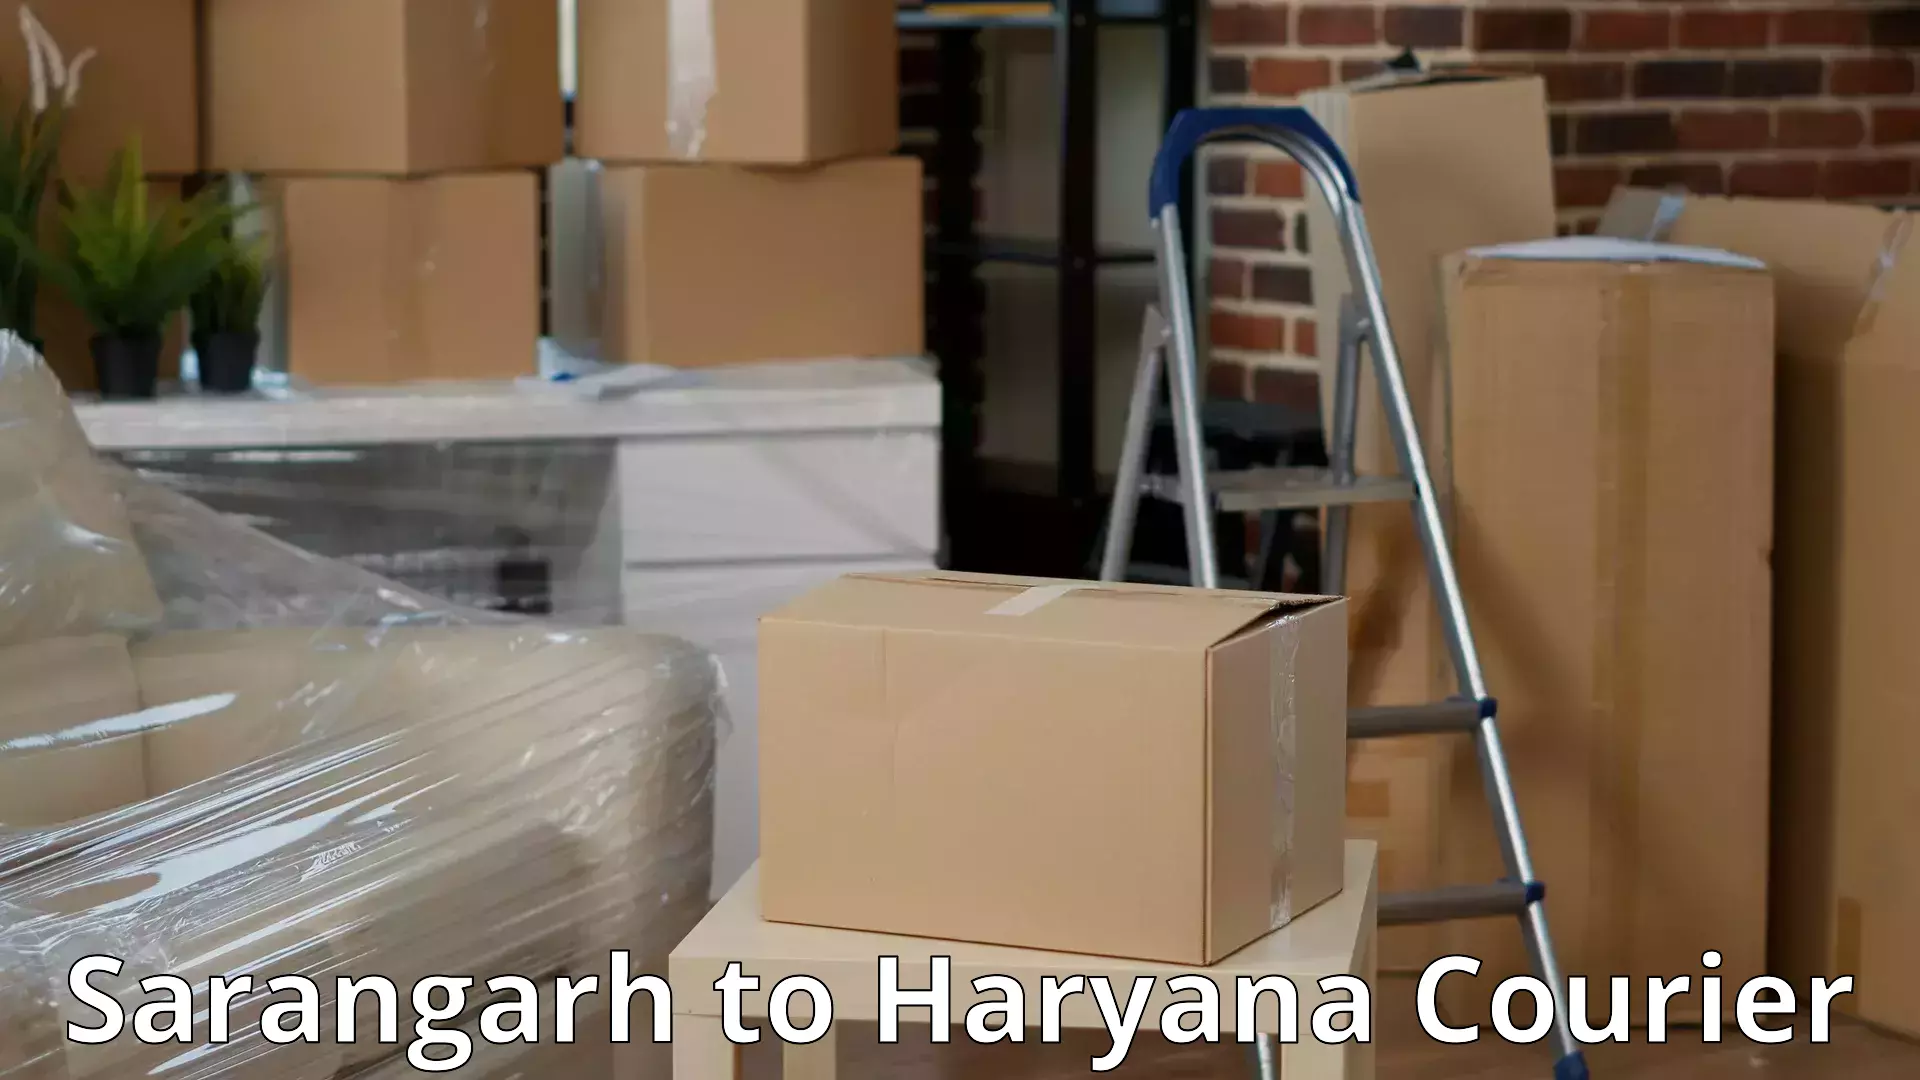 Reliable movers in Sarangarh to Faridabad